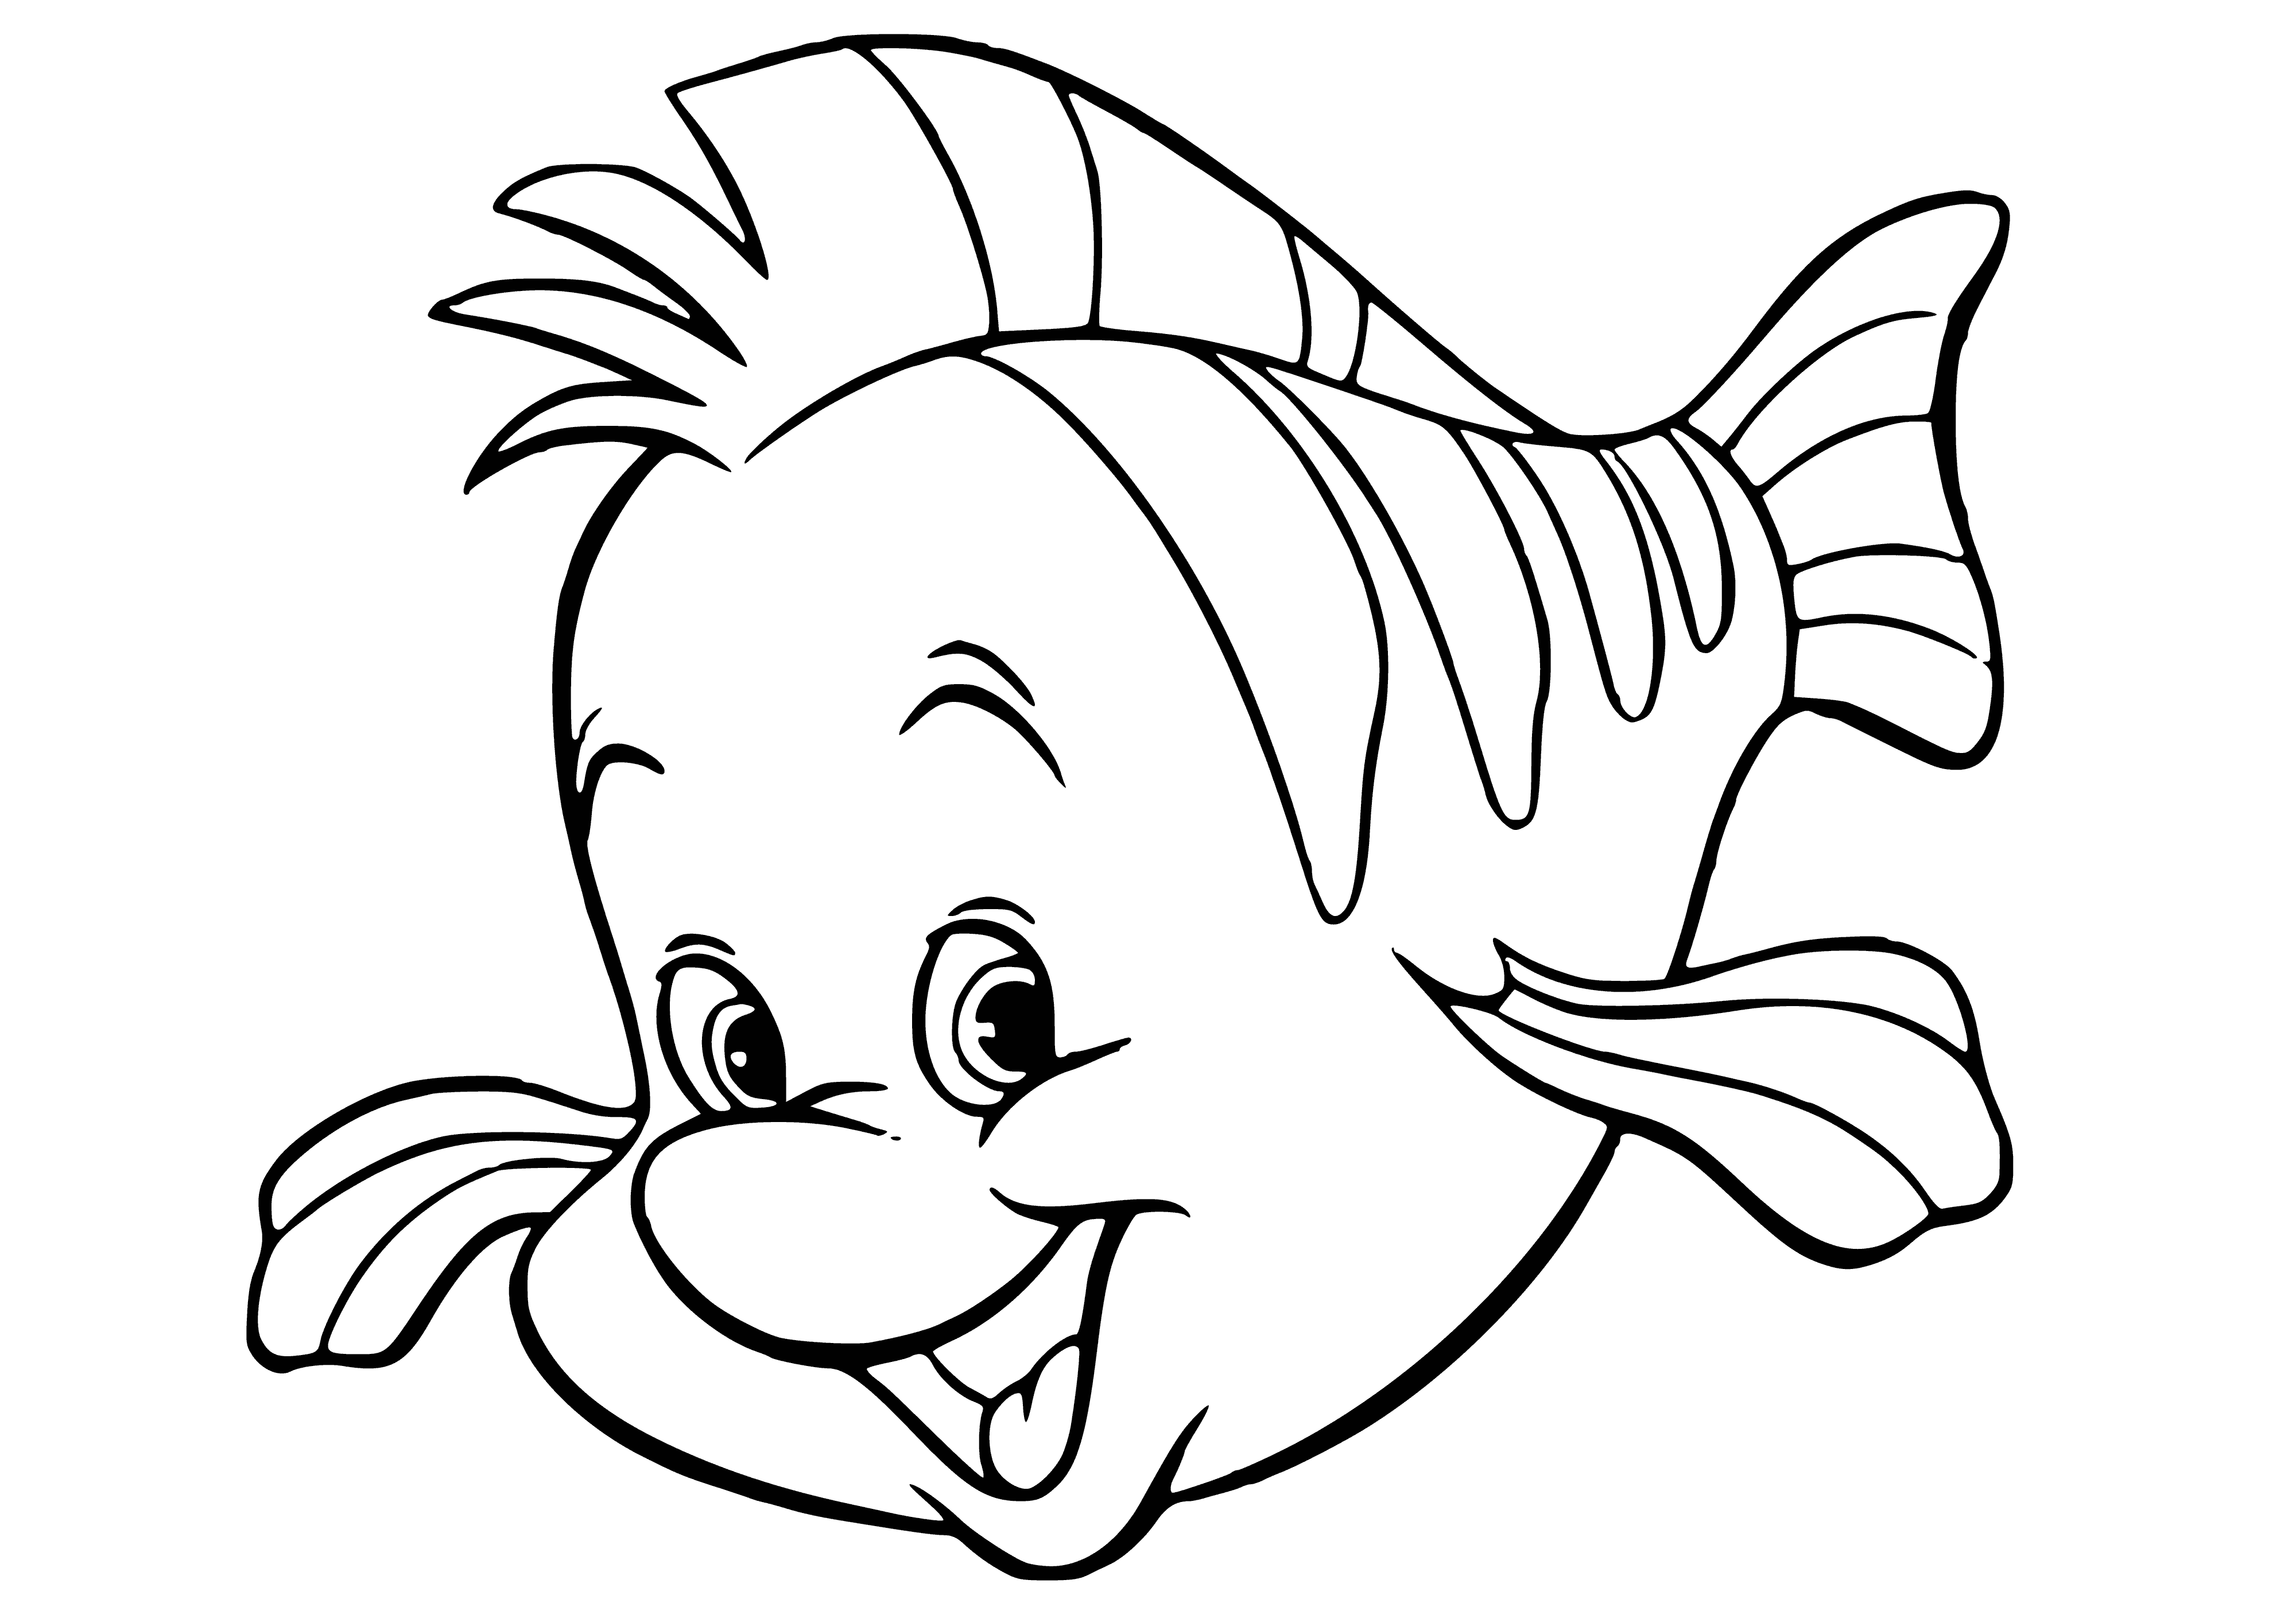 Fish Flounder coloring page